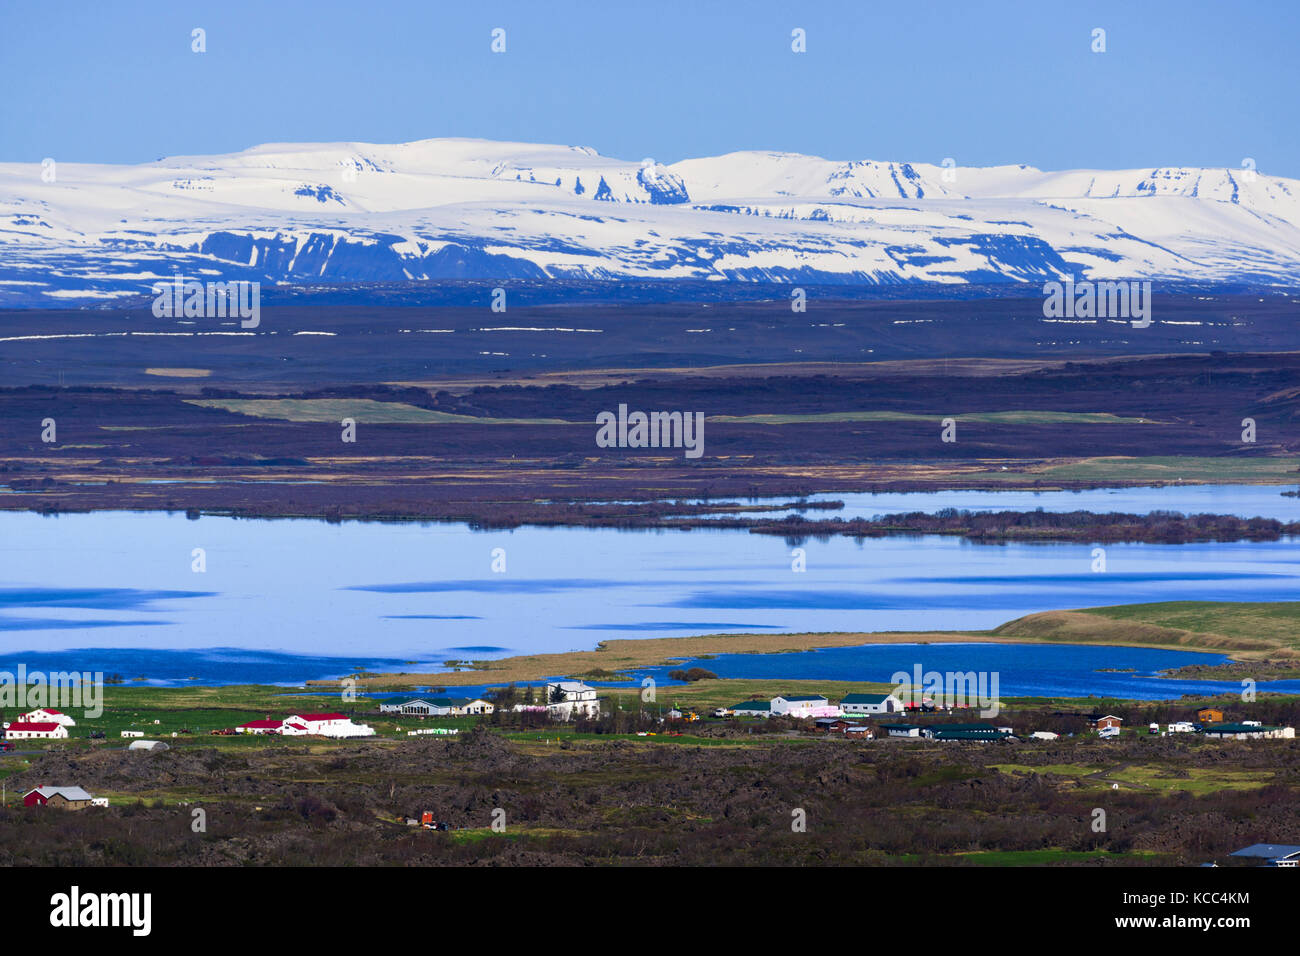 View towards Mývatn lake and snow-capped mountains from Hverfell. Mývatn region, northern Iceland. Stock Photo